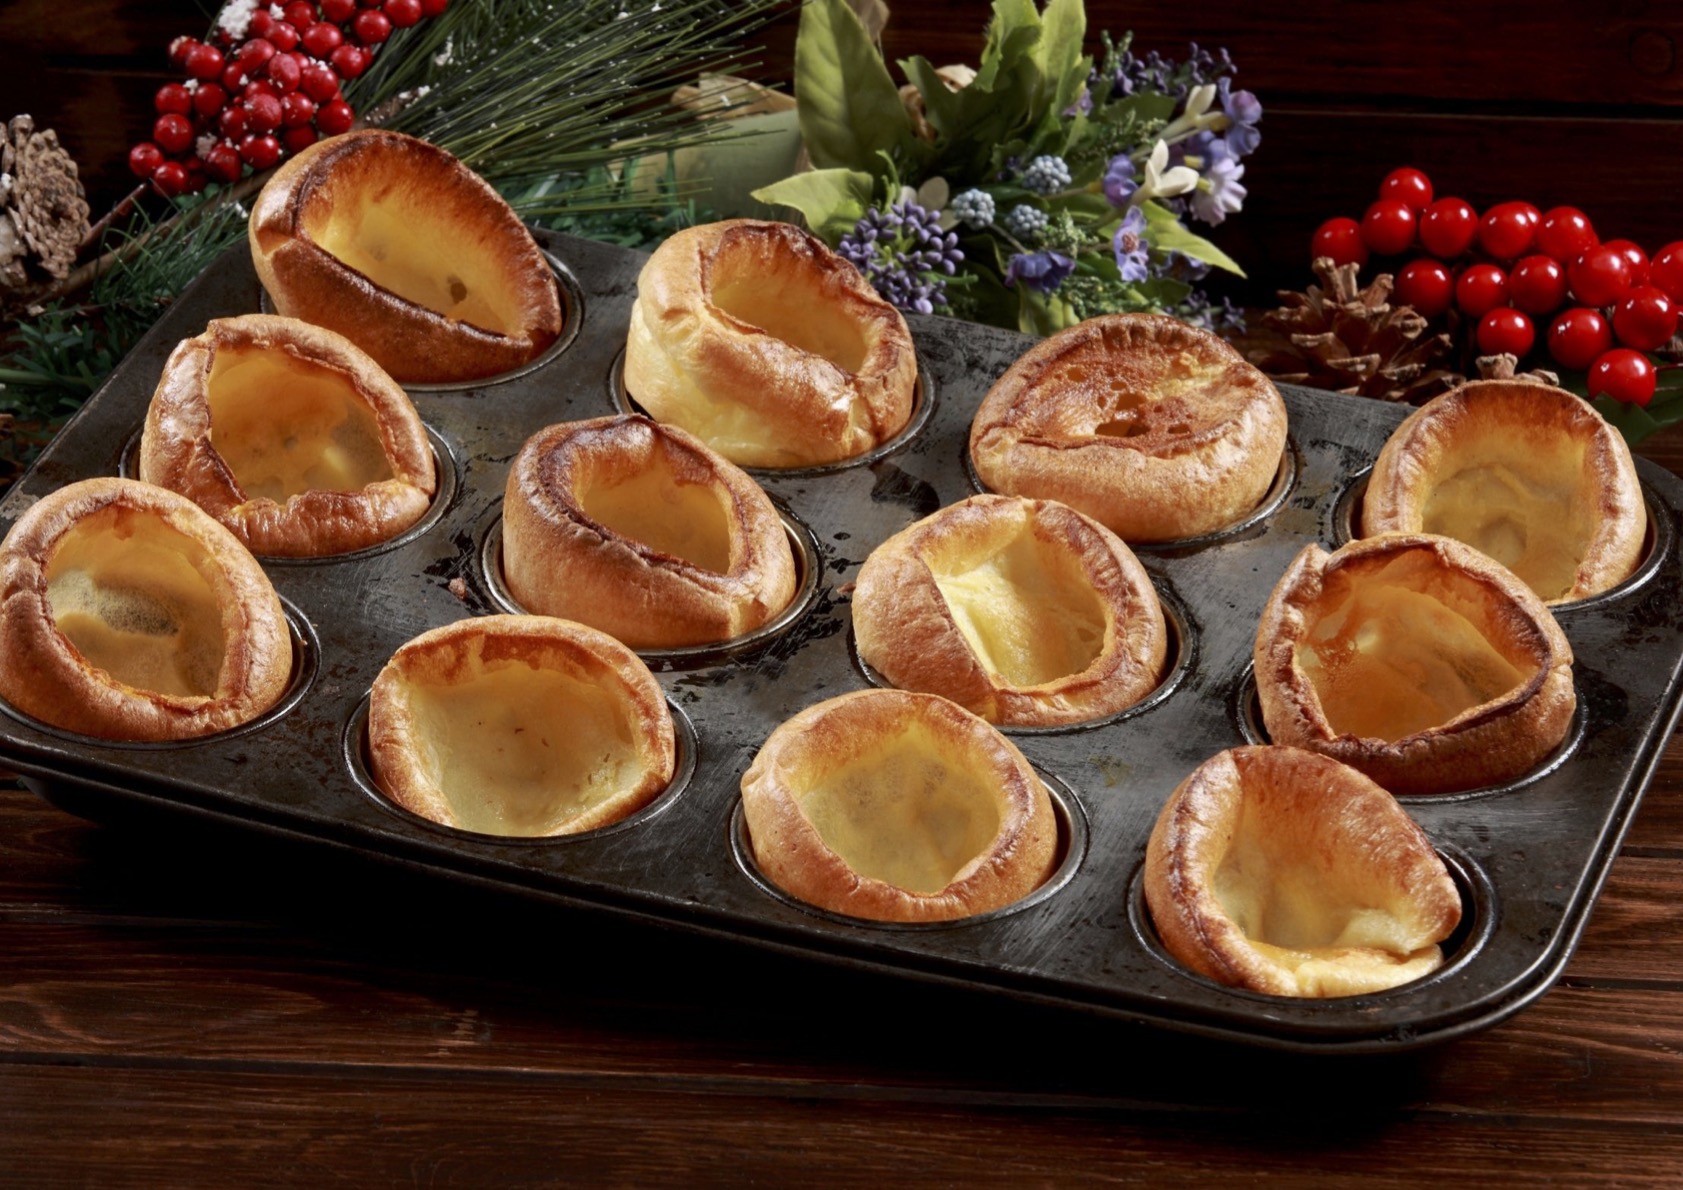 The Yorkshire Pudding!